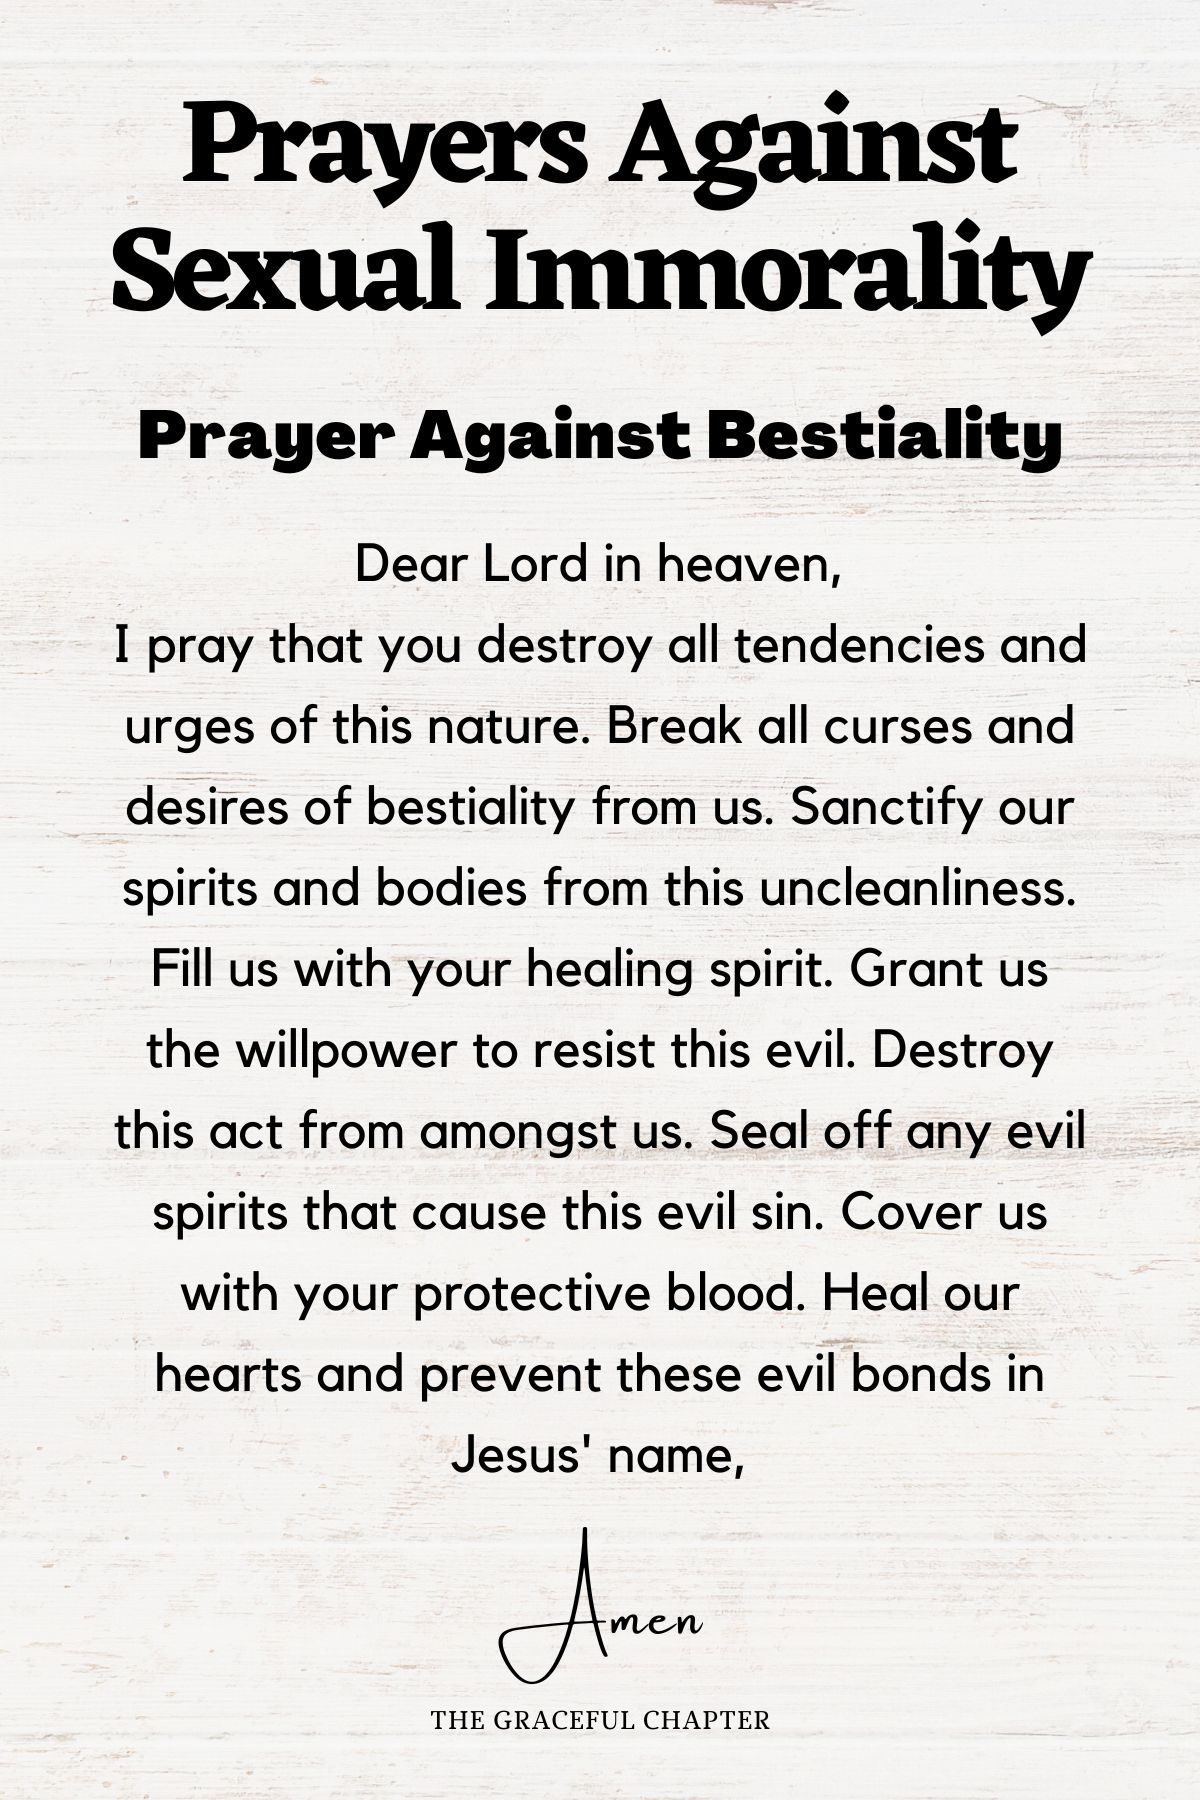 Prayer against bestiality - 10 Effective Prayers Against Sexual Immorality